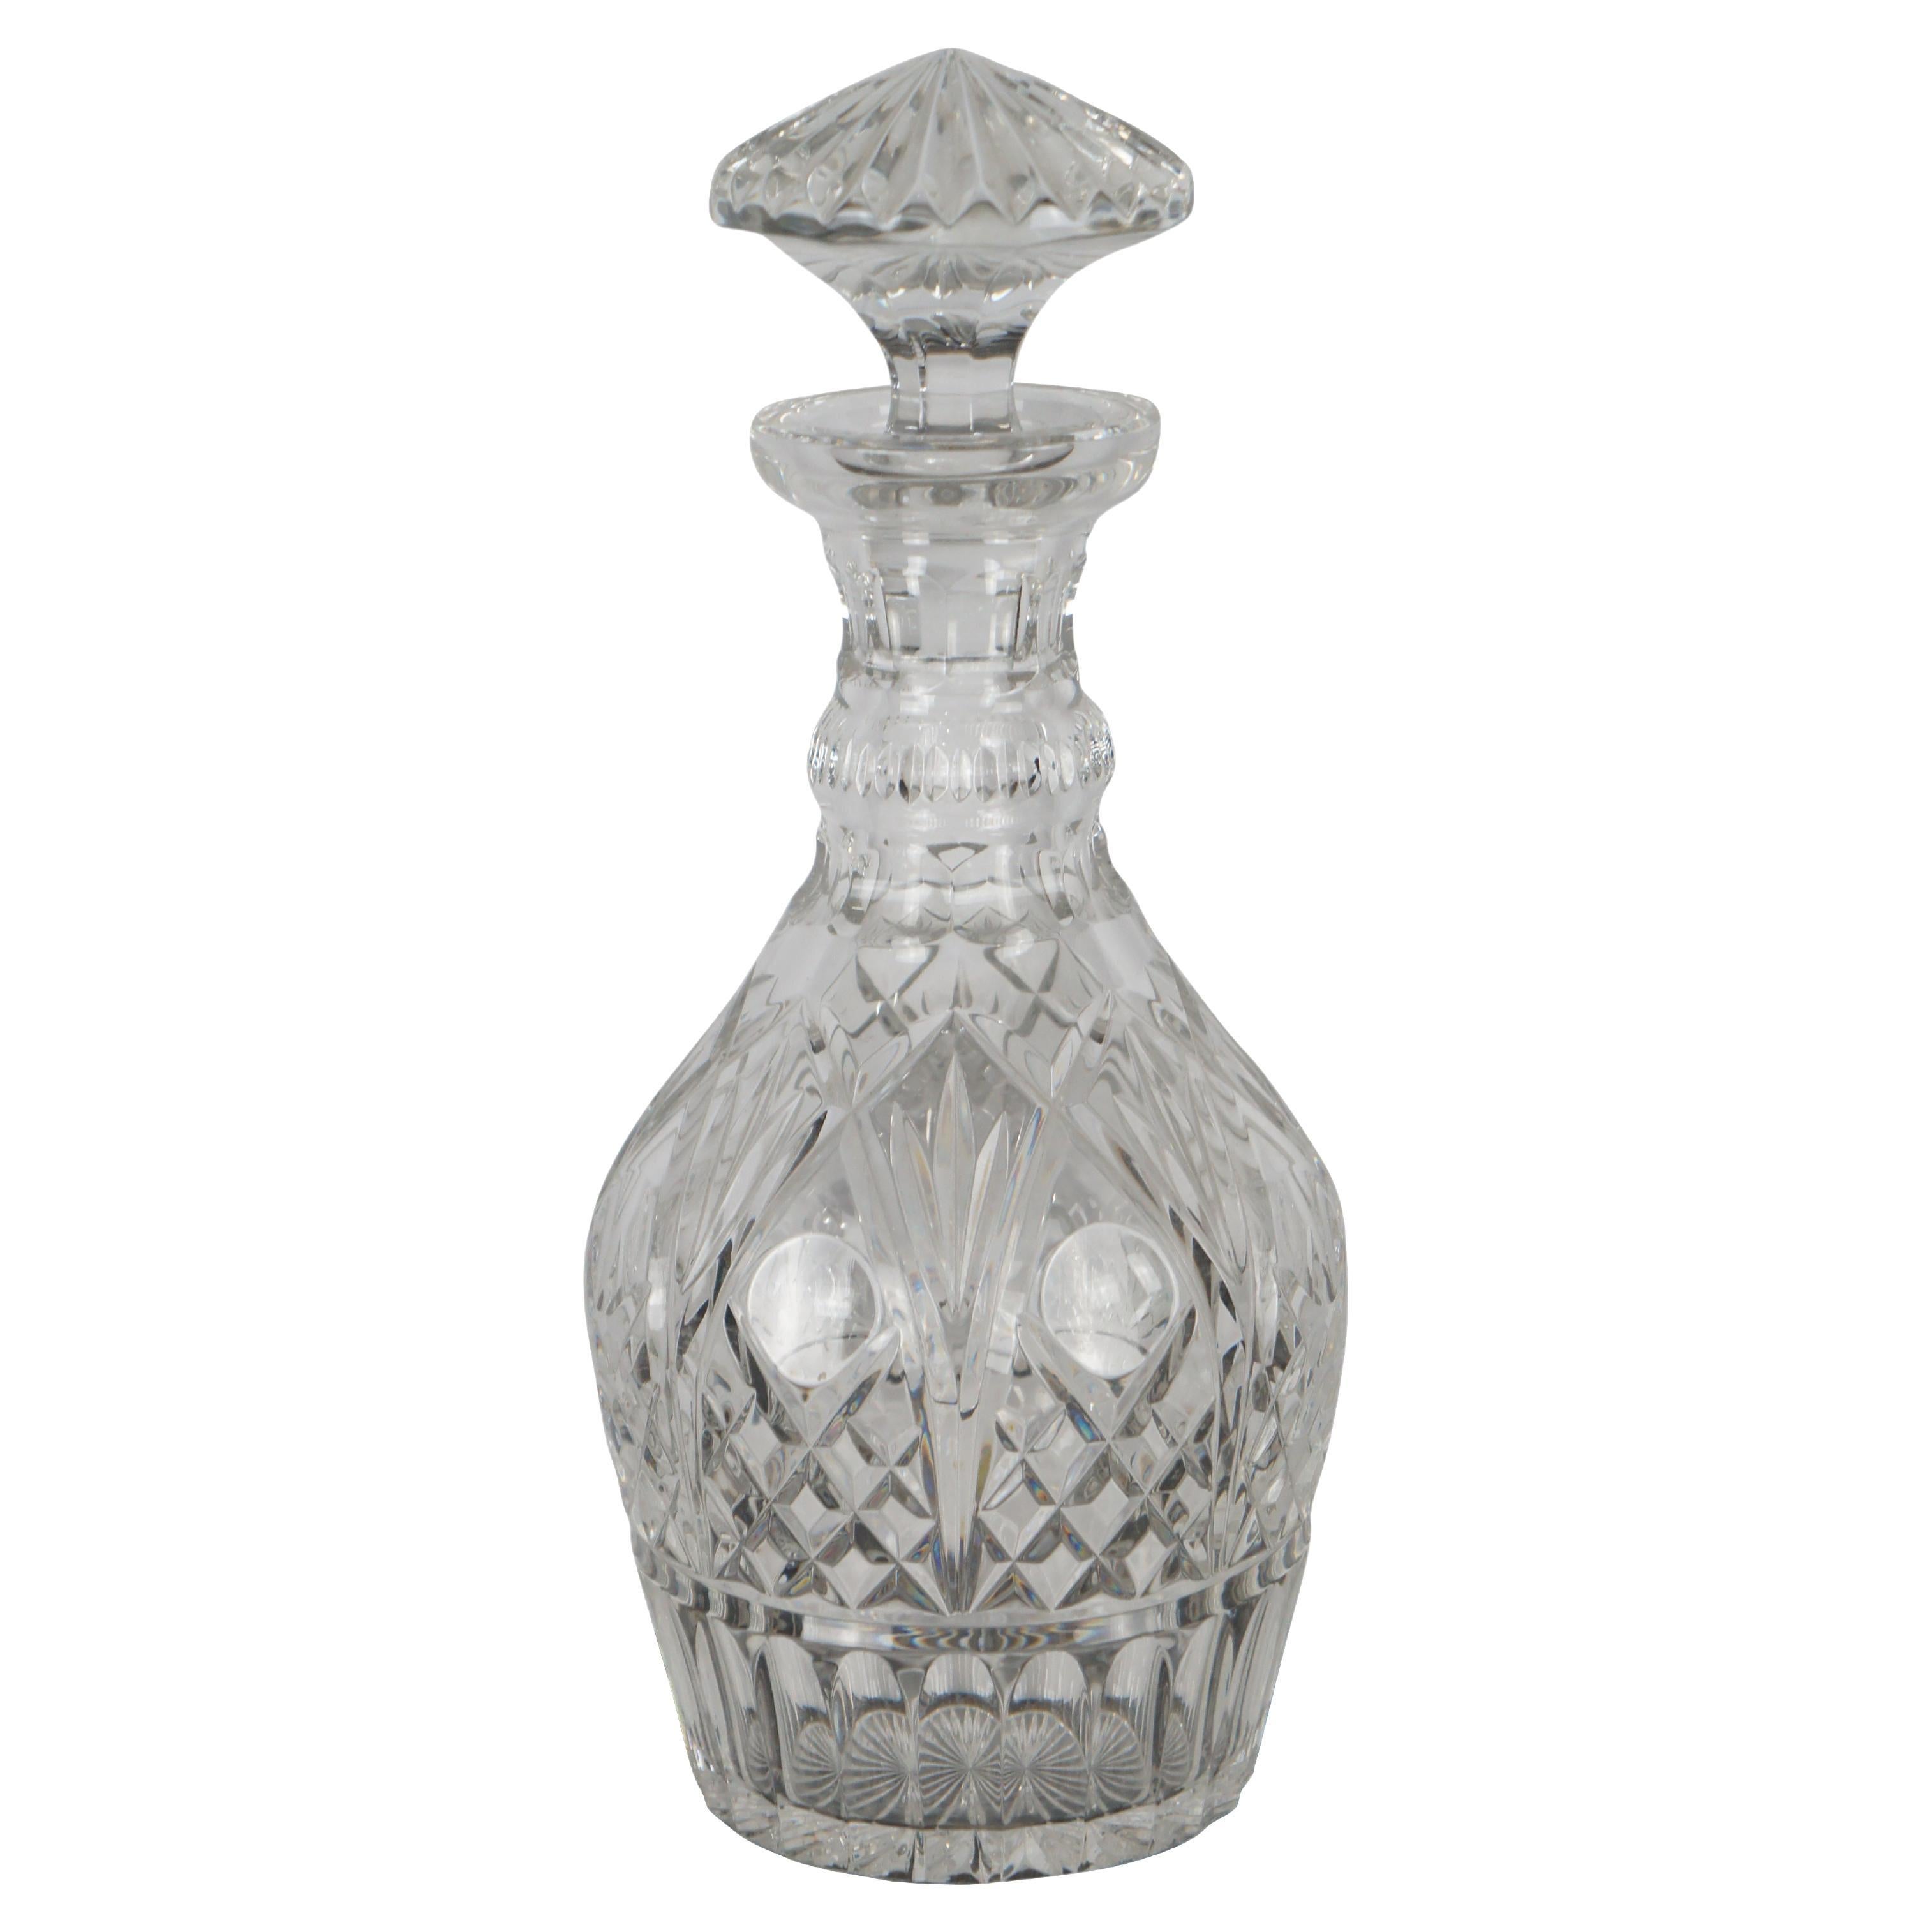 Waterford Irish Crystal Meagher Cut Glass Wine Spirit Decanter & Stopper 12"